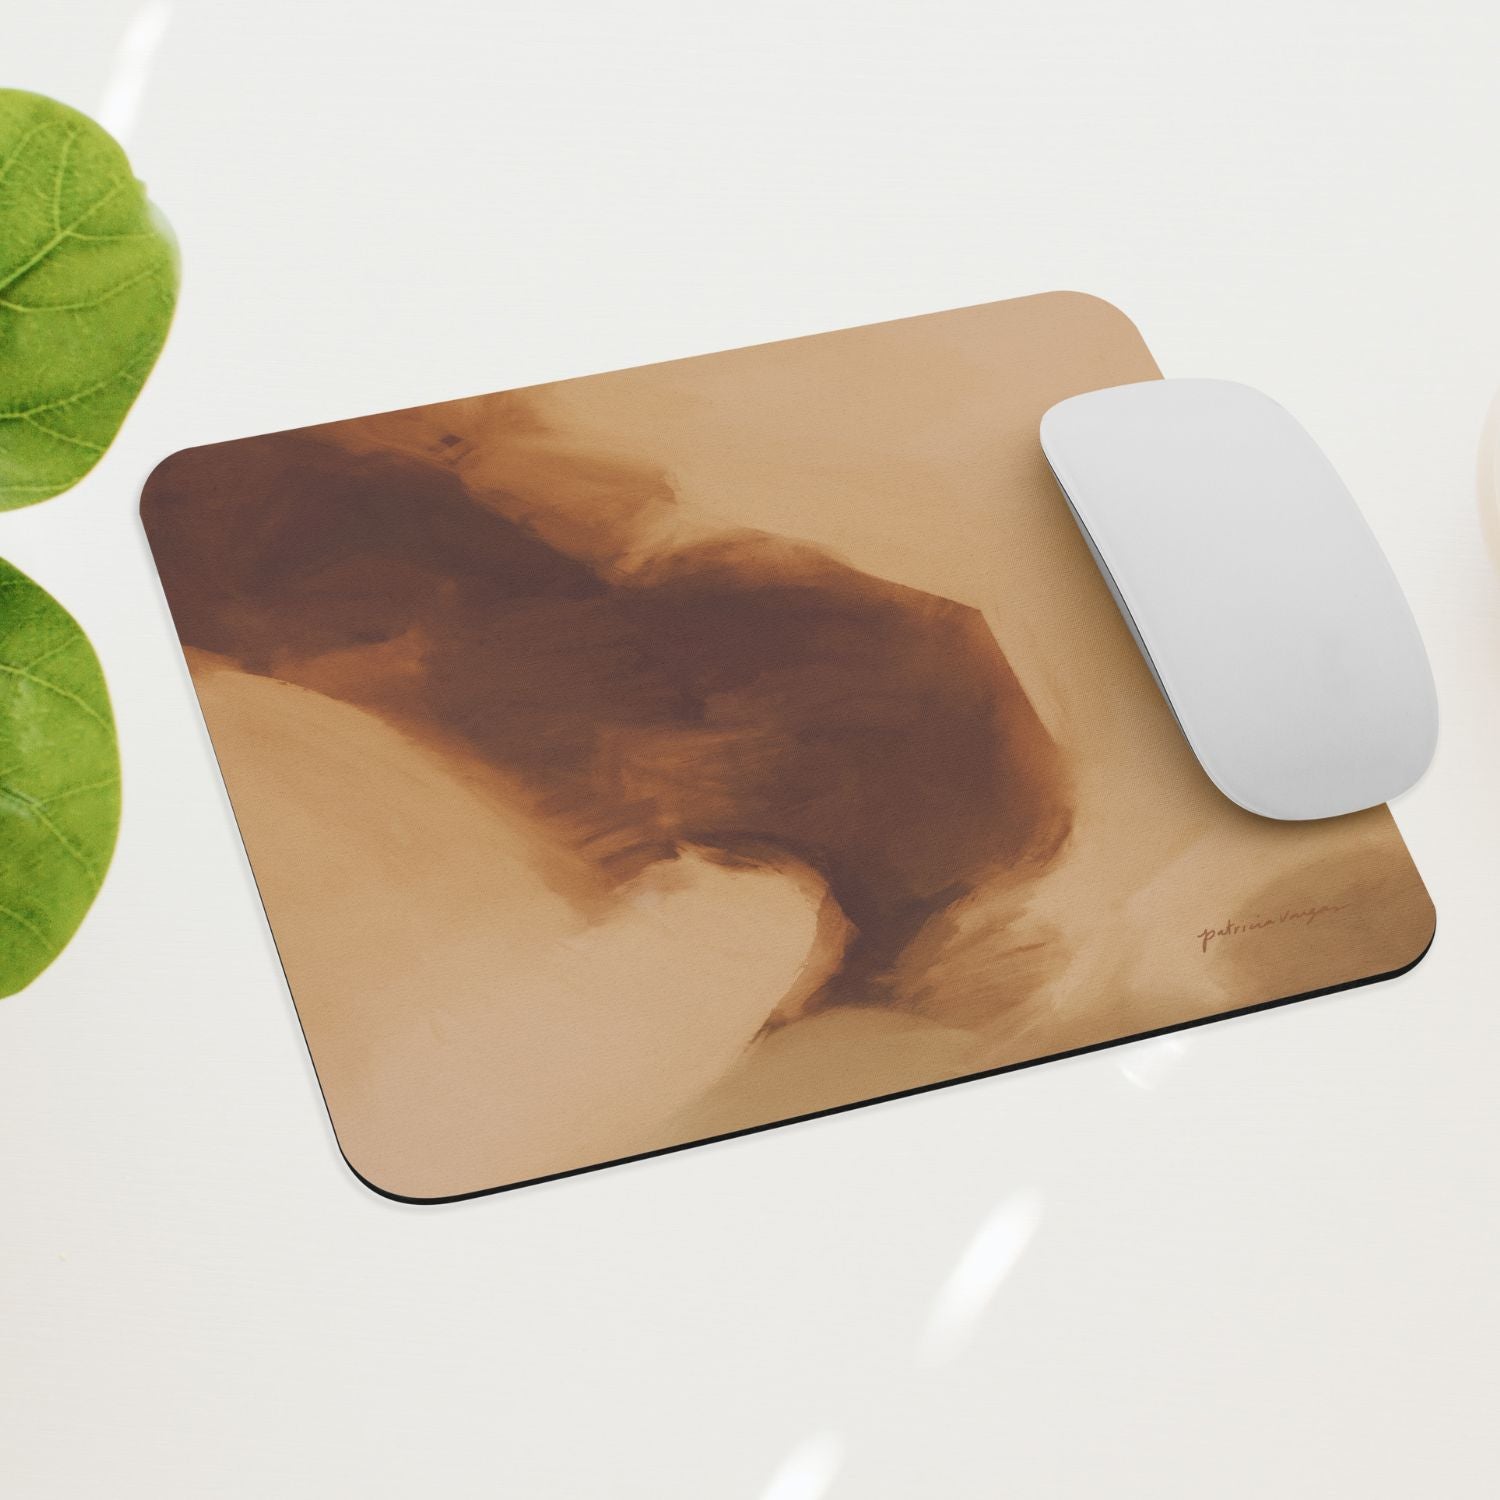 Clay, brown and tan mouse pad for styling your office desk. Featuring artwork by Parima Studio. Home office styling accessories, cubicle styling accessories.